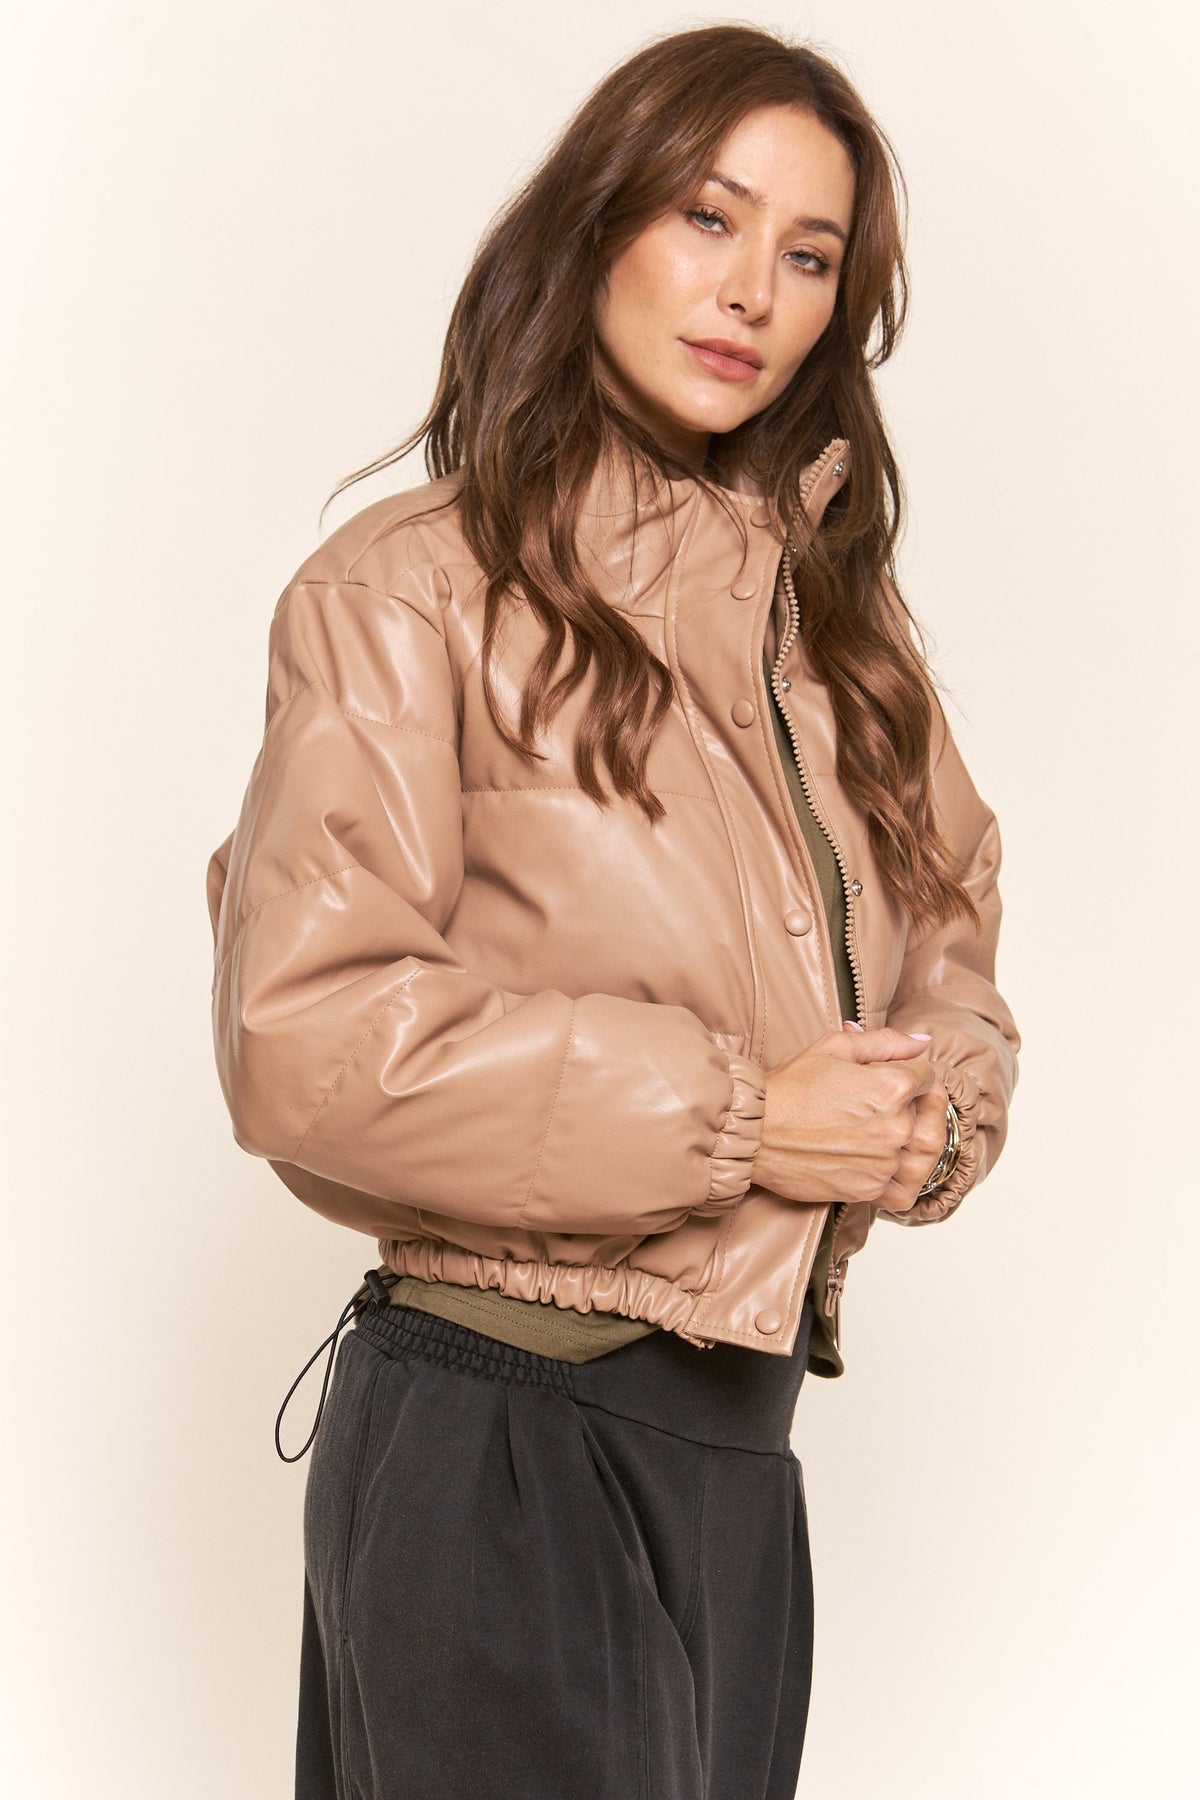 J.NNA | Tan Faux Leather Puffer Jacket | Sweetest Stitch Boutique